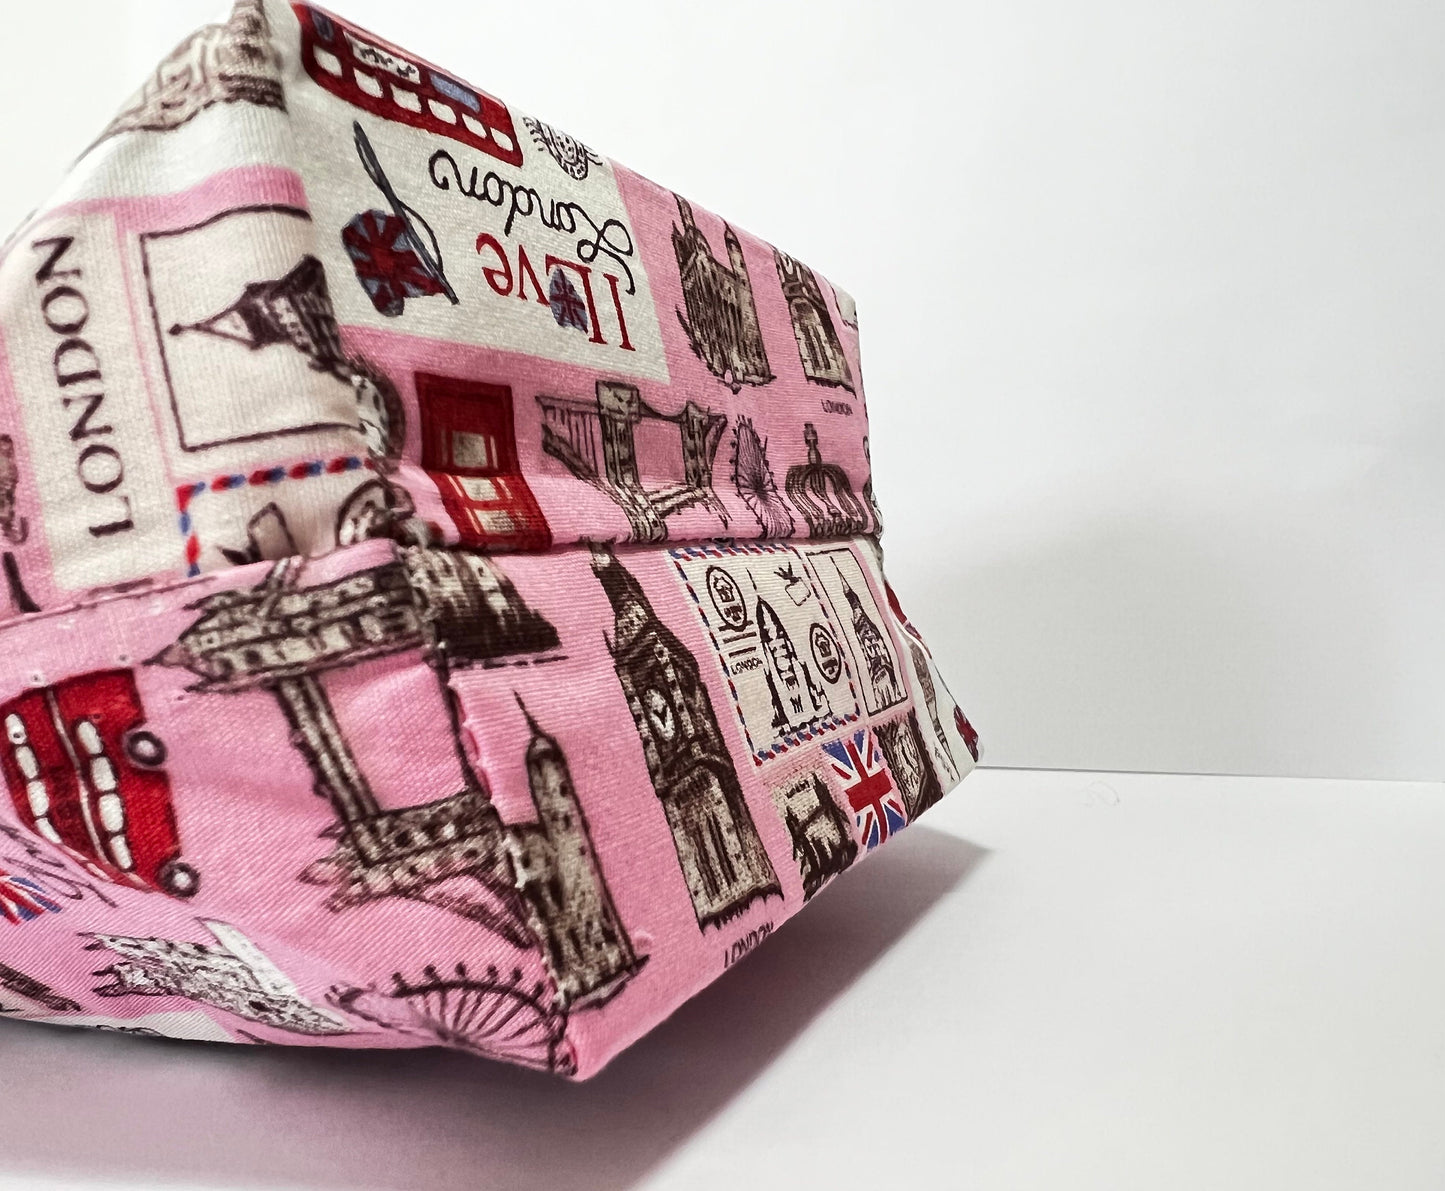 London Themed Notions Bags for Knitters, Sewers, Crocheters - Tools & Accessories Pouch